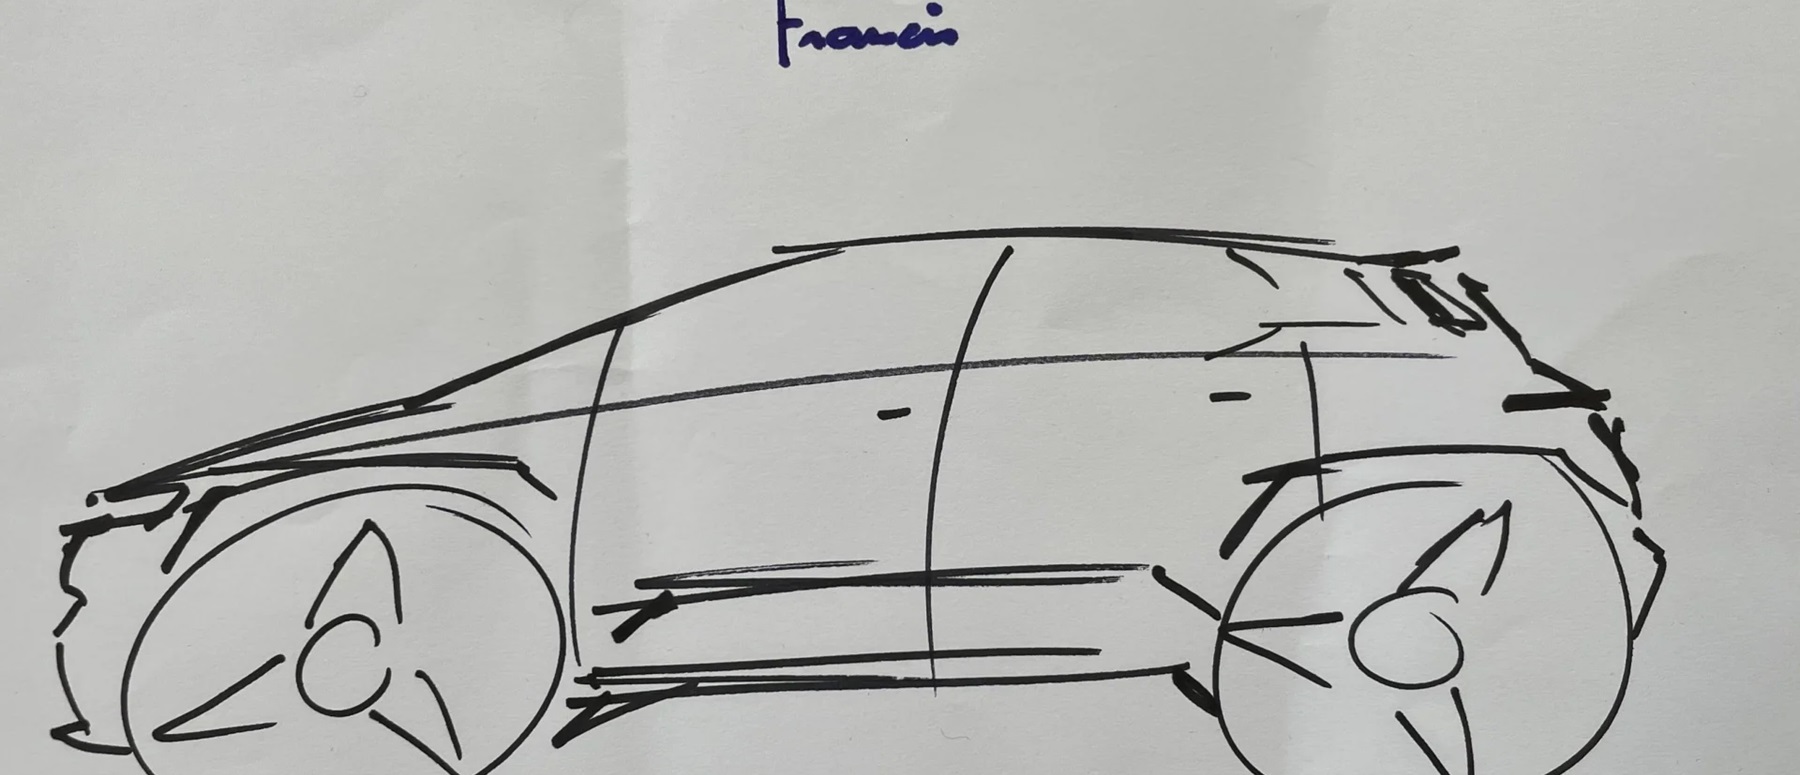 Sketch signed by Pope Francis of the Popemobile - Fisker Ocean SUV